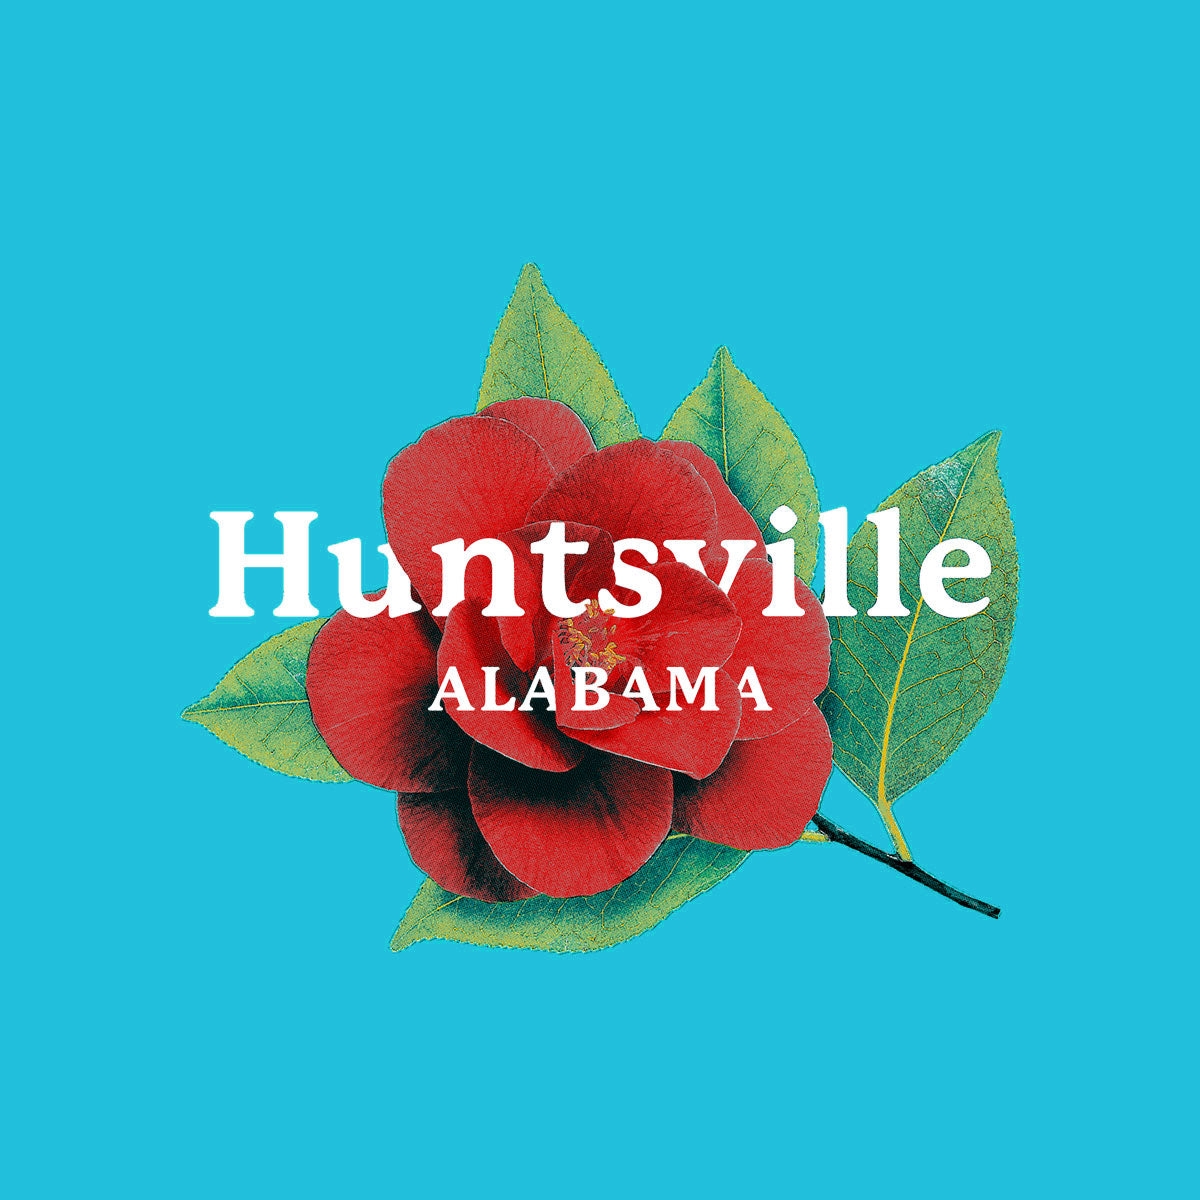 Thumbnail of red camellia flower with text "Huntsville Alabama" on teal background